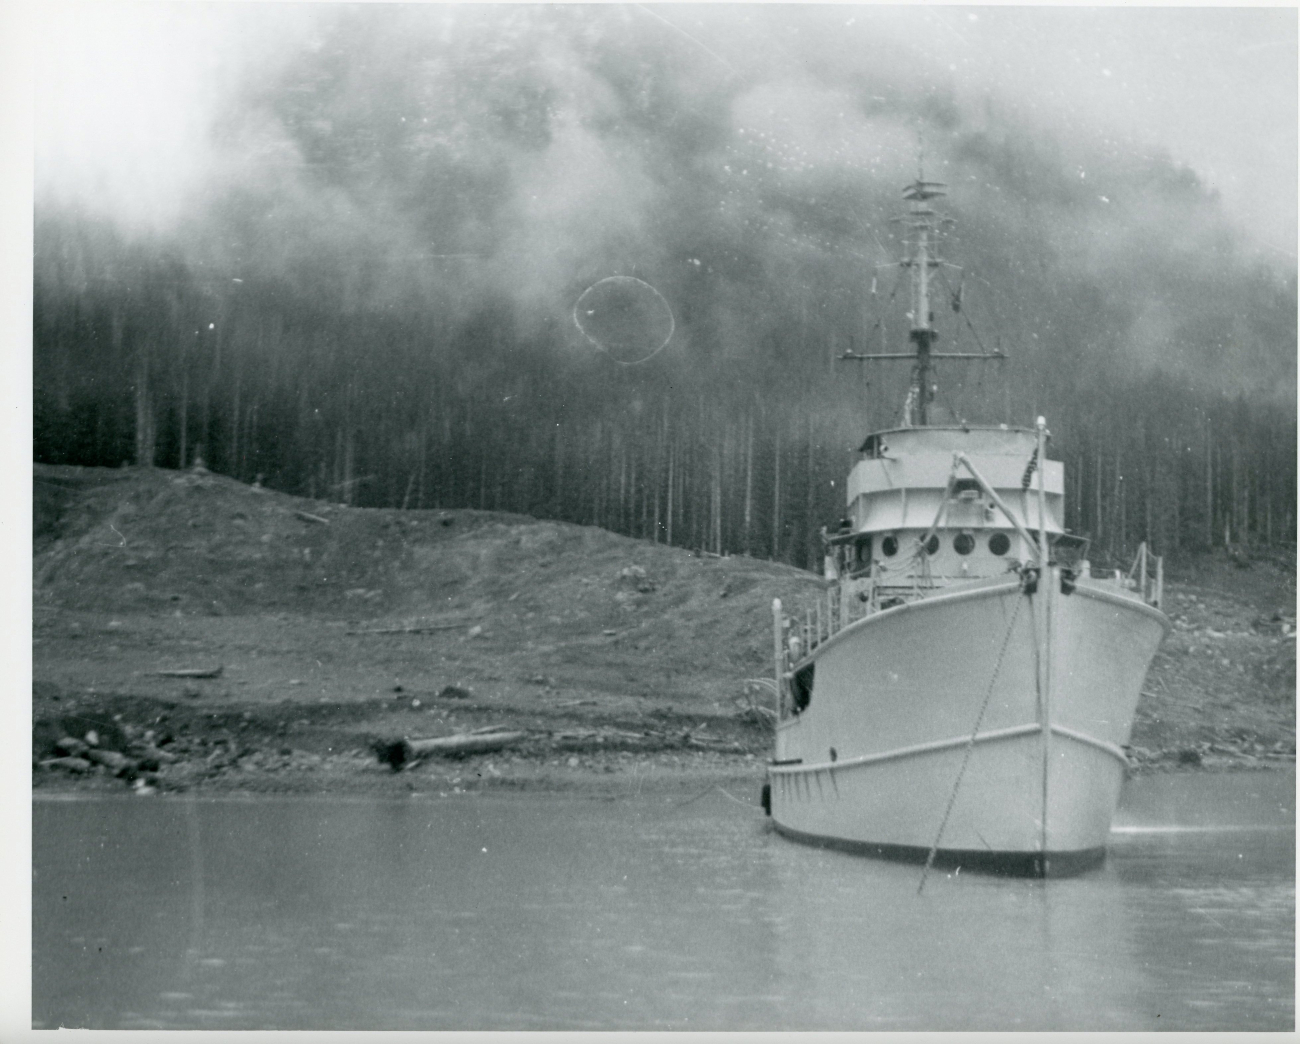 USC&GS; Ship BOWIE somewhere in southern Alaska